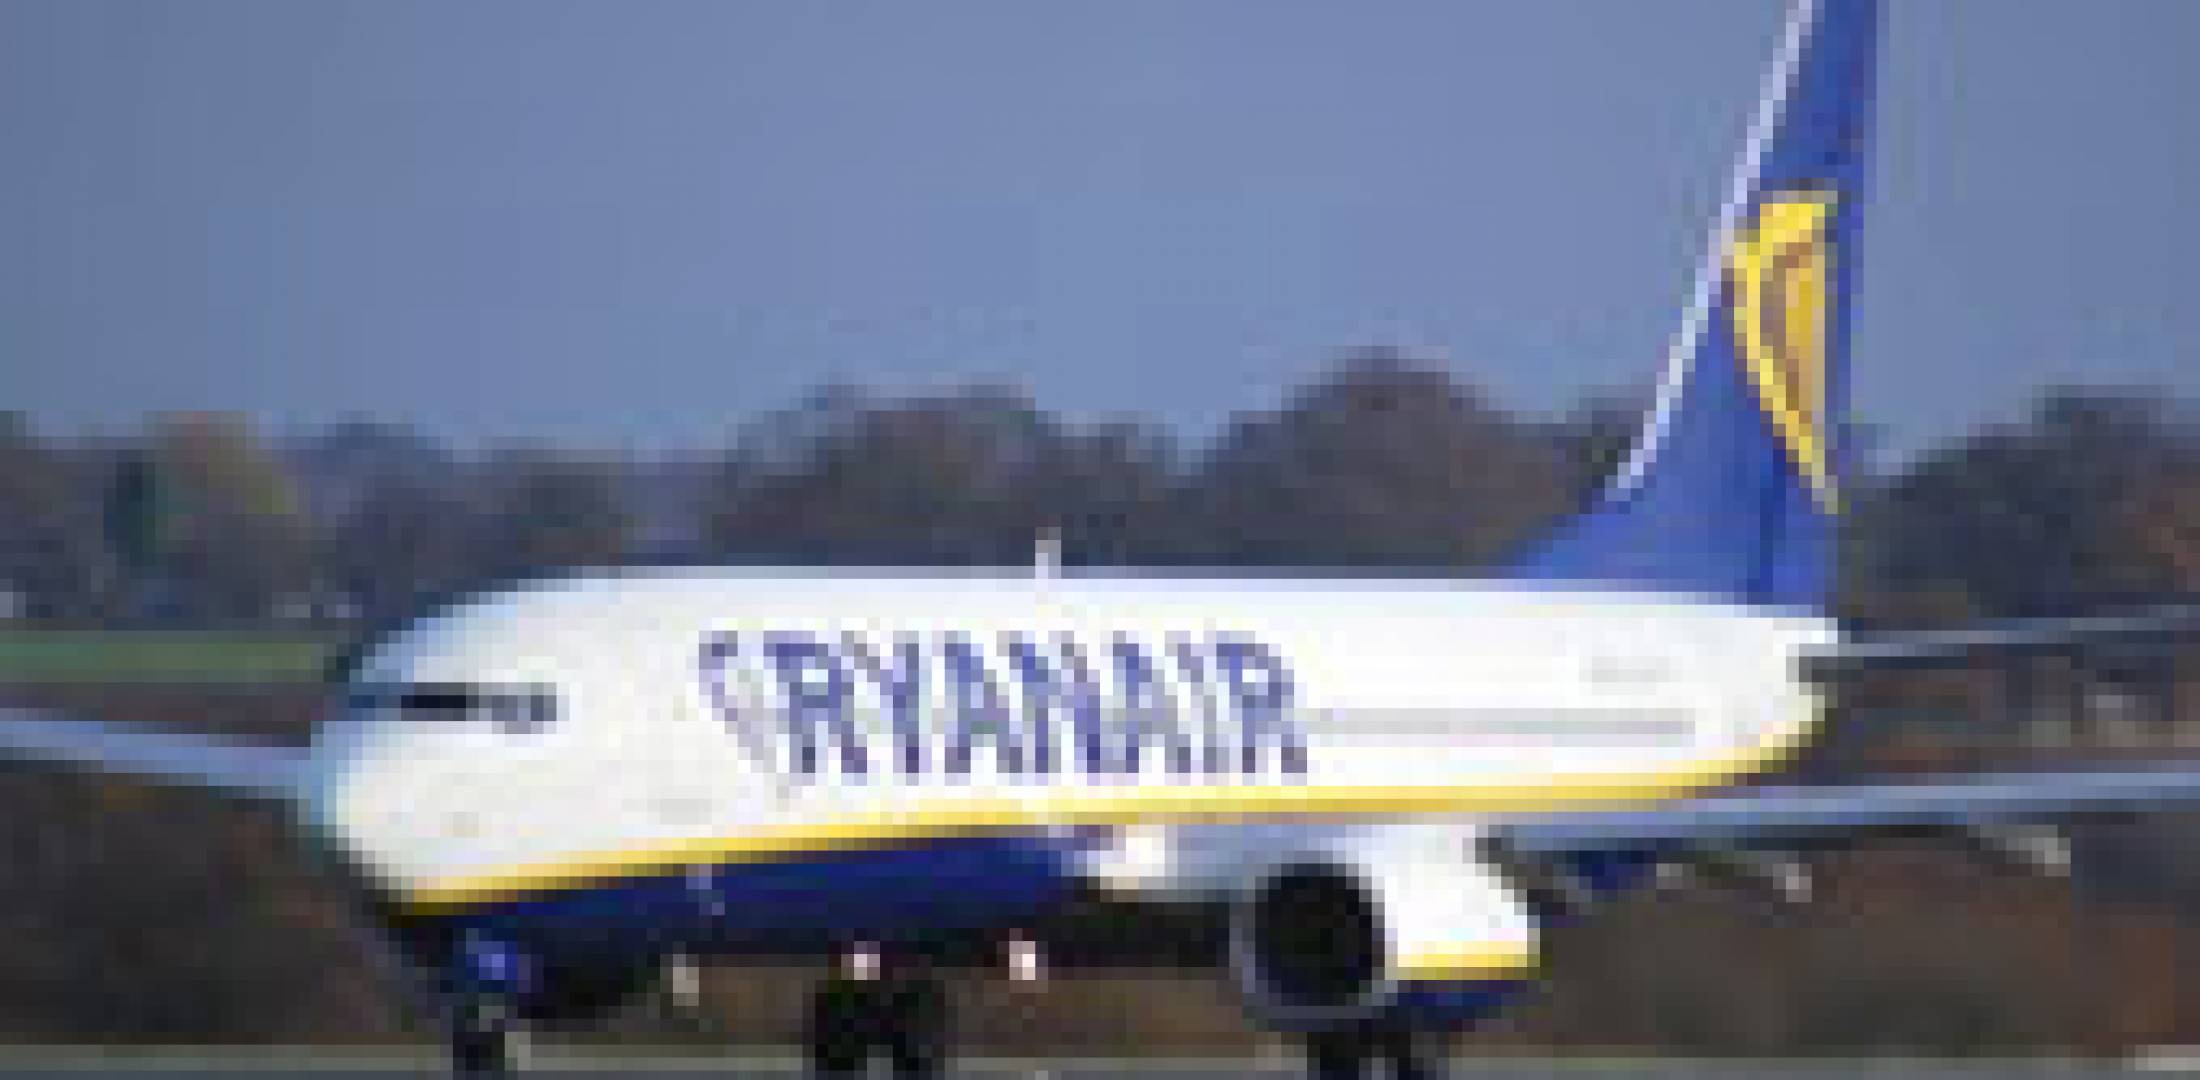 Ryanair's O'Leary Calls for Single-Pilot Commercial Flights | Air ...